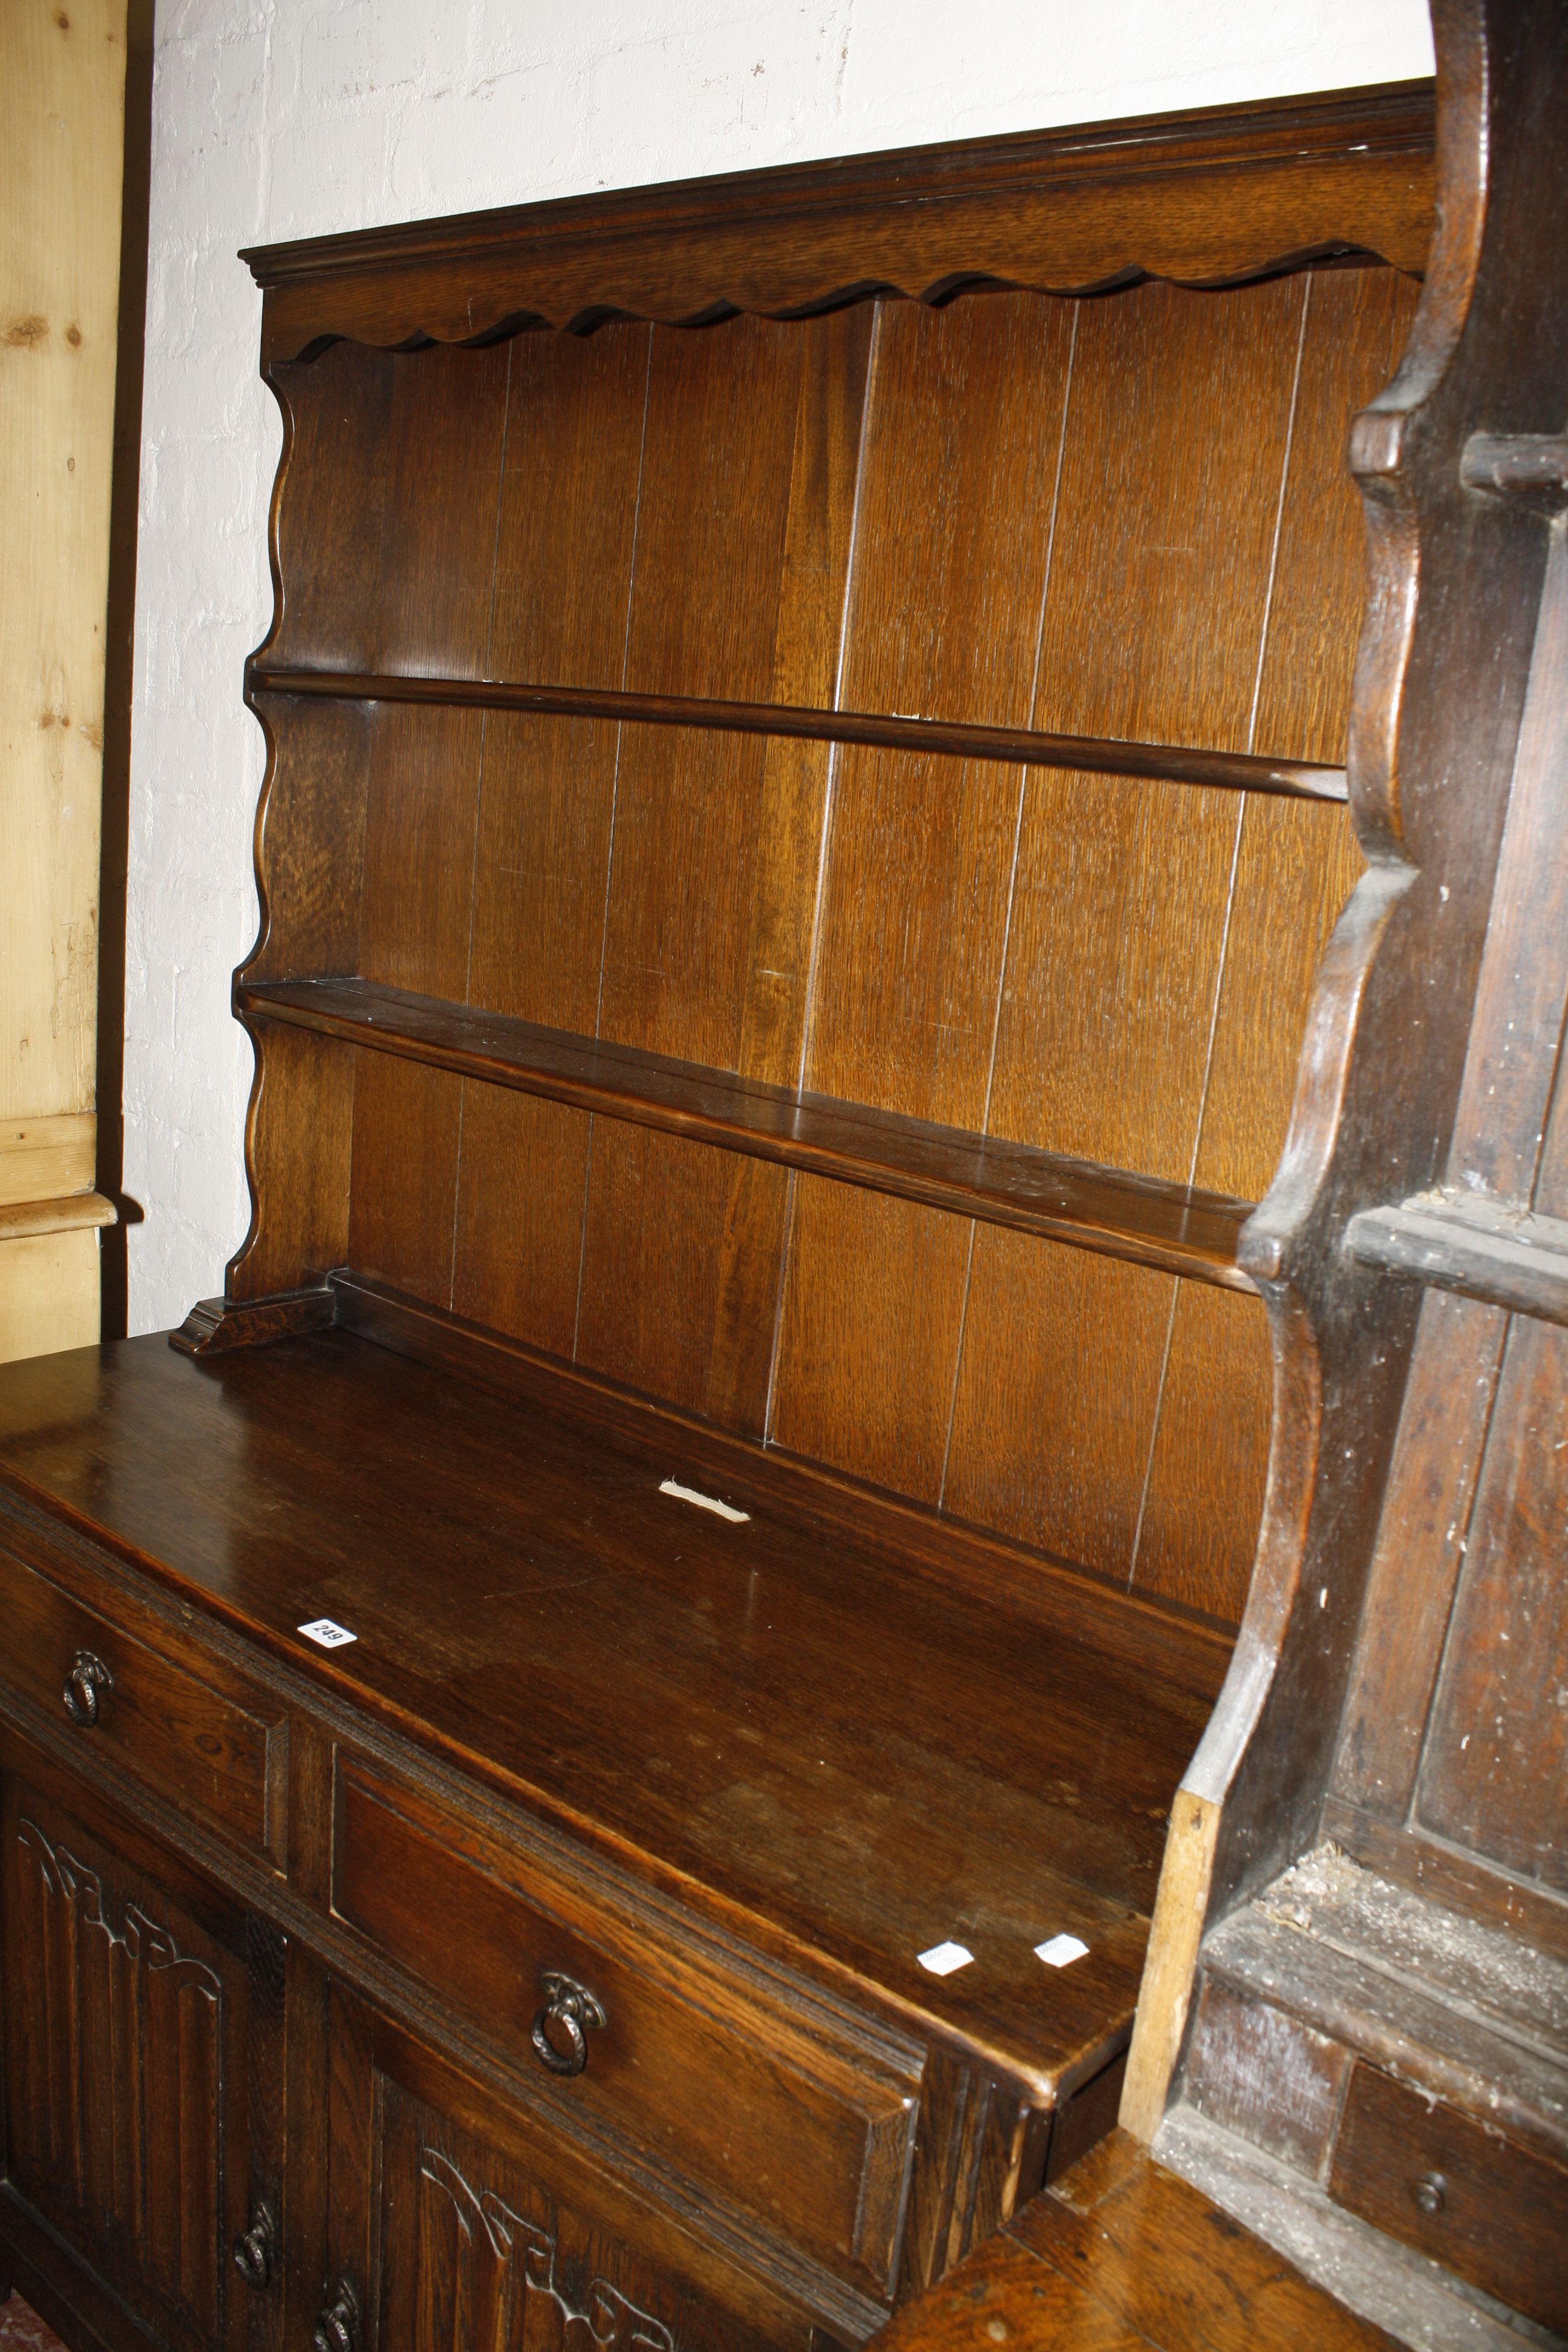 An oak linen fold dresser with a platerack and two drawers and cupboards 175cm high, 107cm wide